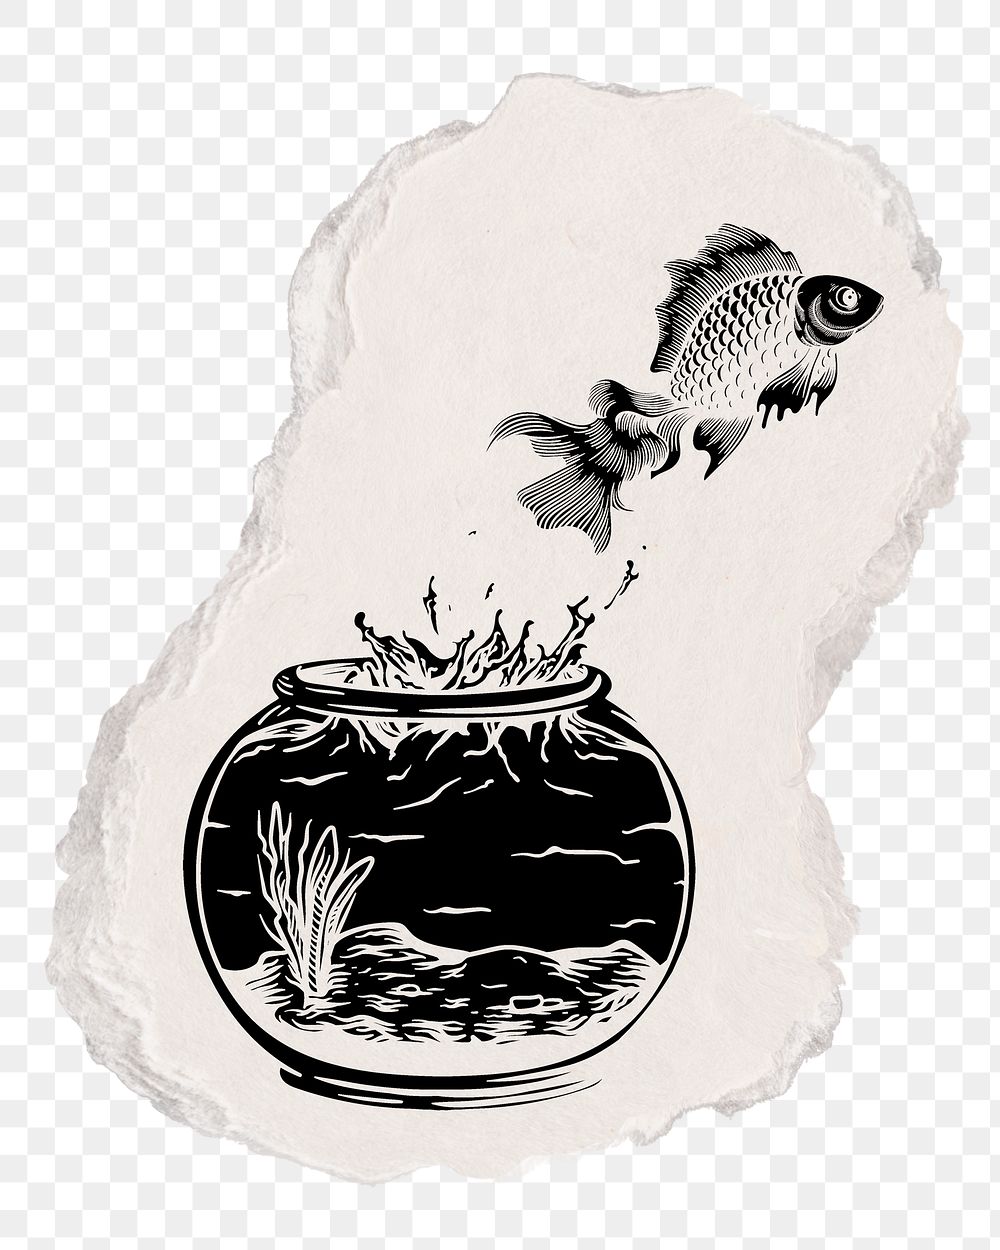 Fish escaping bowl png sticker, ripped paper, transparent background